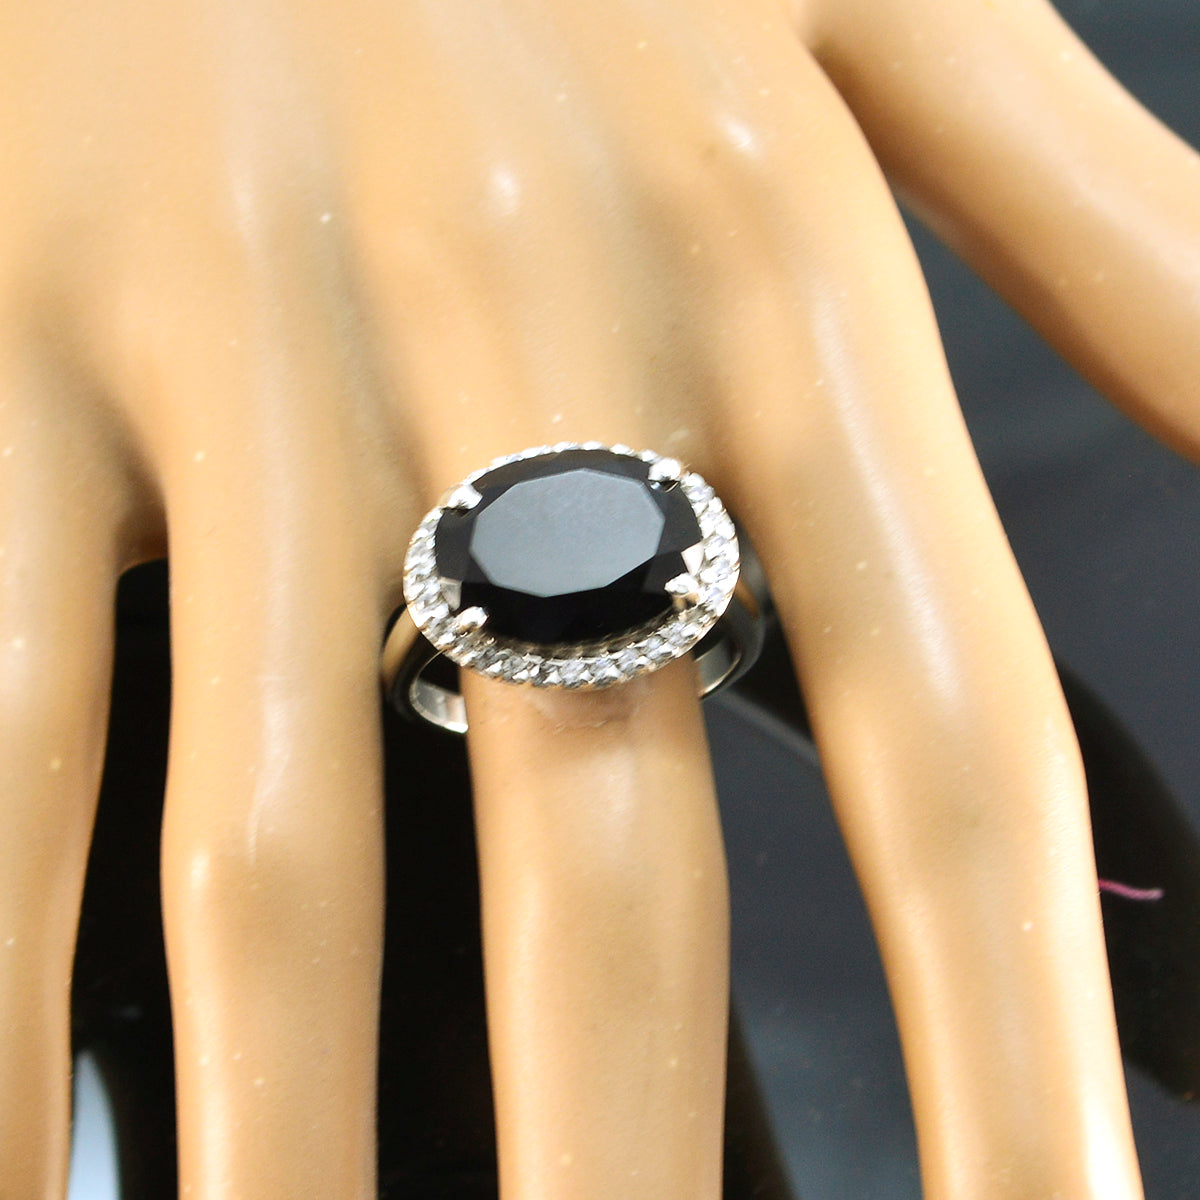 Handcrafted Gemstones Black Onyx Solid Silver Rings Jewelry Engraving